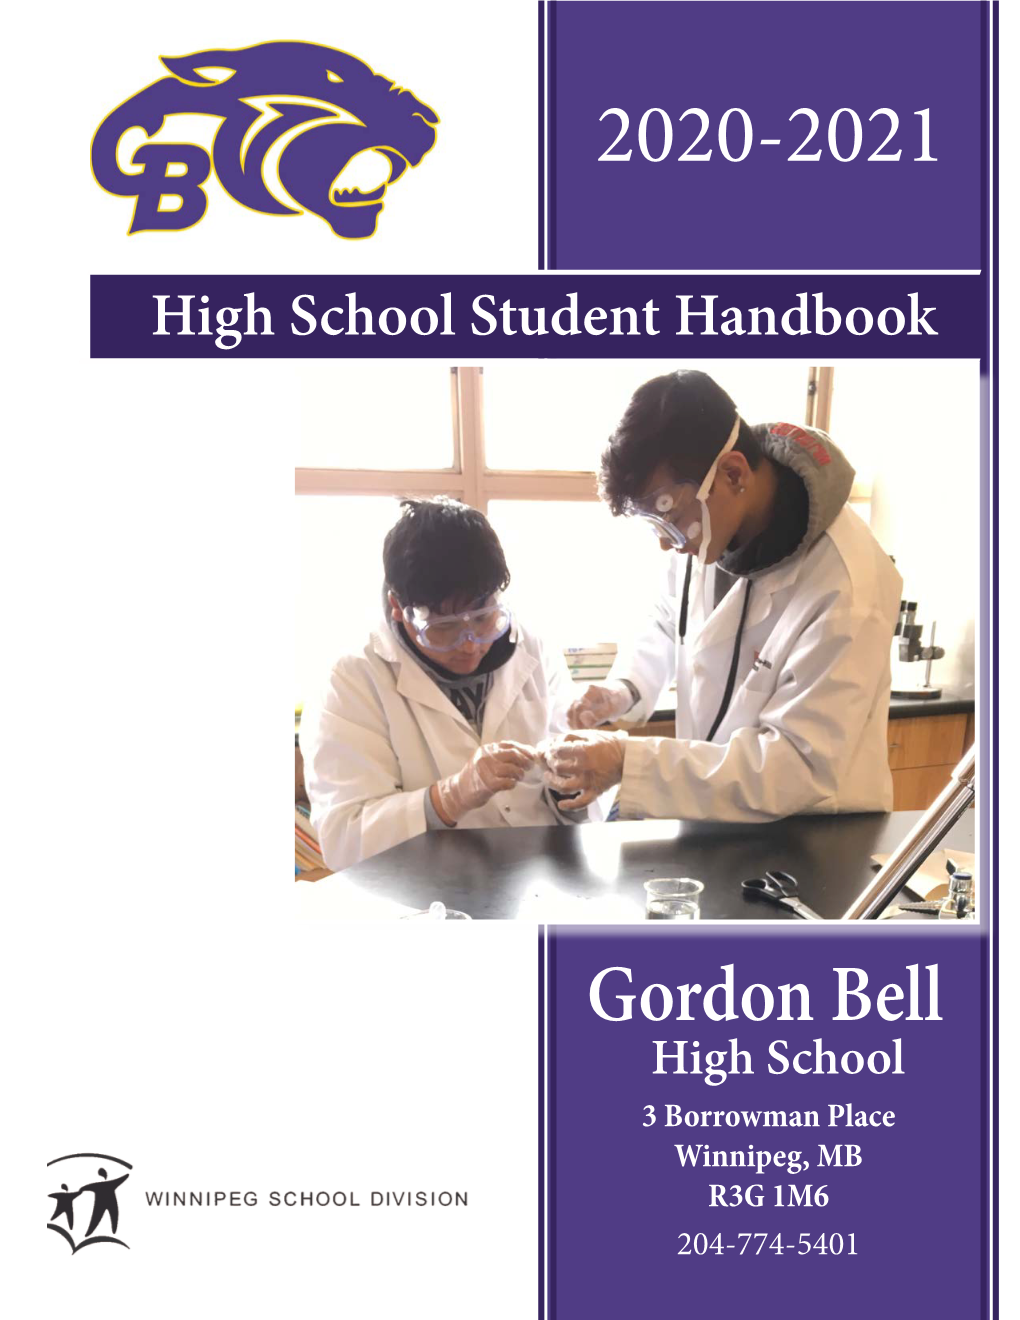 Gordon Bell High School 3 Borrowman Place Winnipeg, MB R3G 1M6 204-774-5401 Table of Contents Welcome Course Descriptions Message from Administration